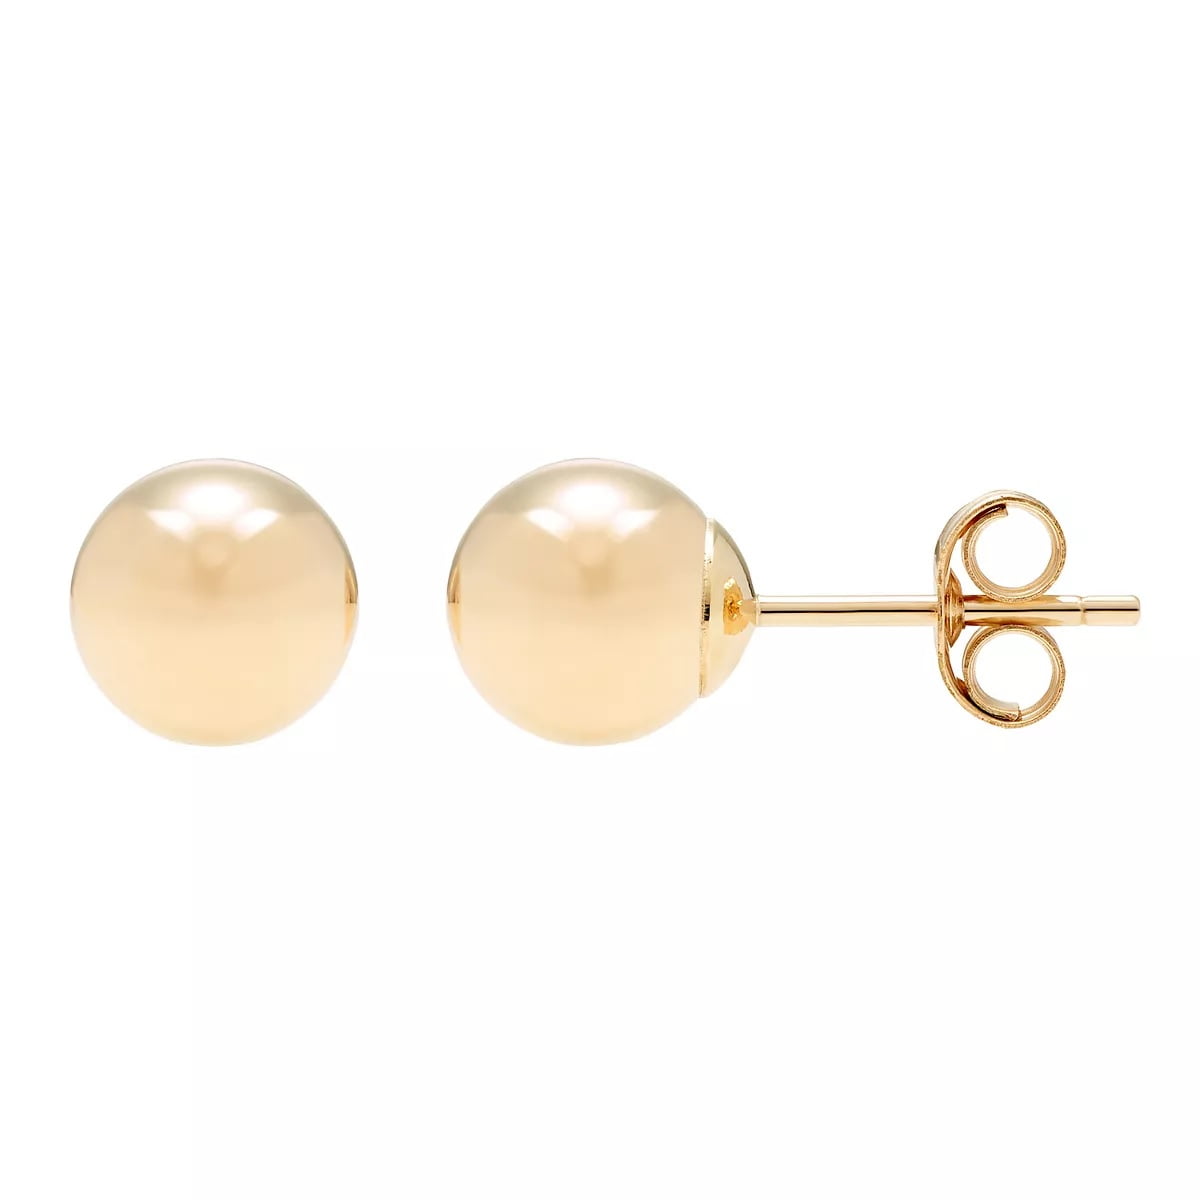 14KT Yellow Gold Earring Shiny Ball Beaded Screw On Half Hoop NEW SINGLE Small Not a Pair